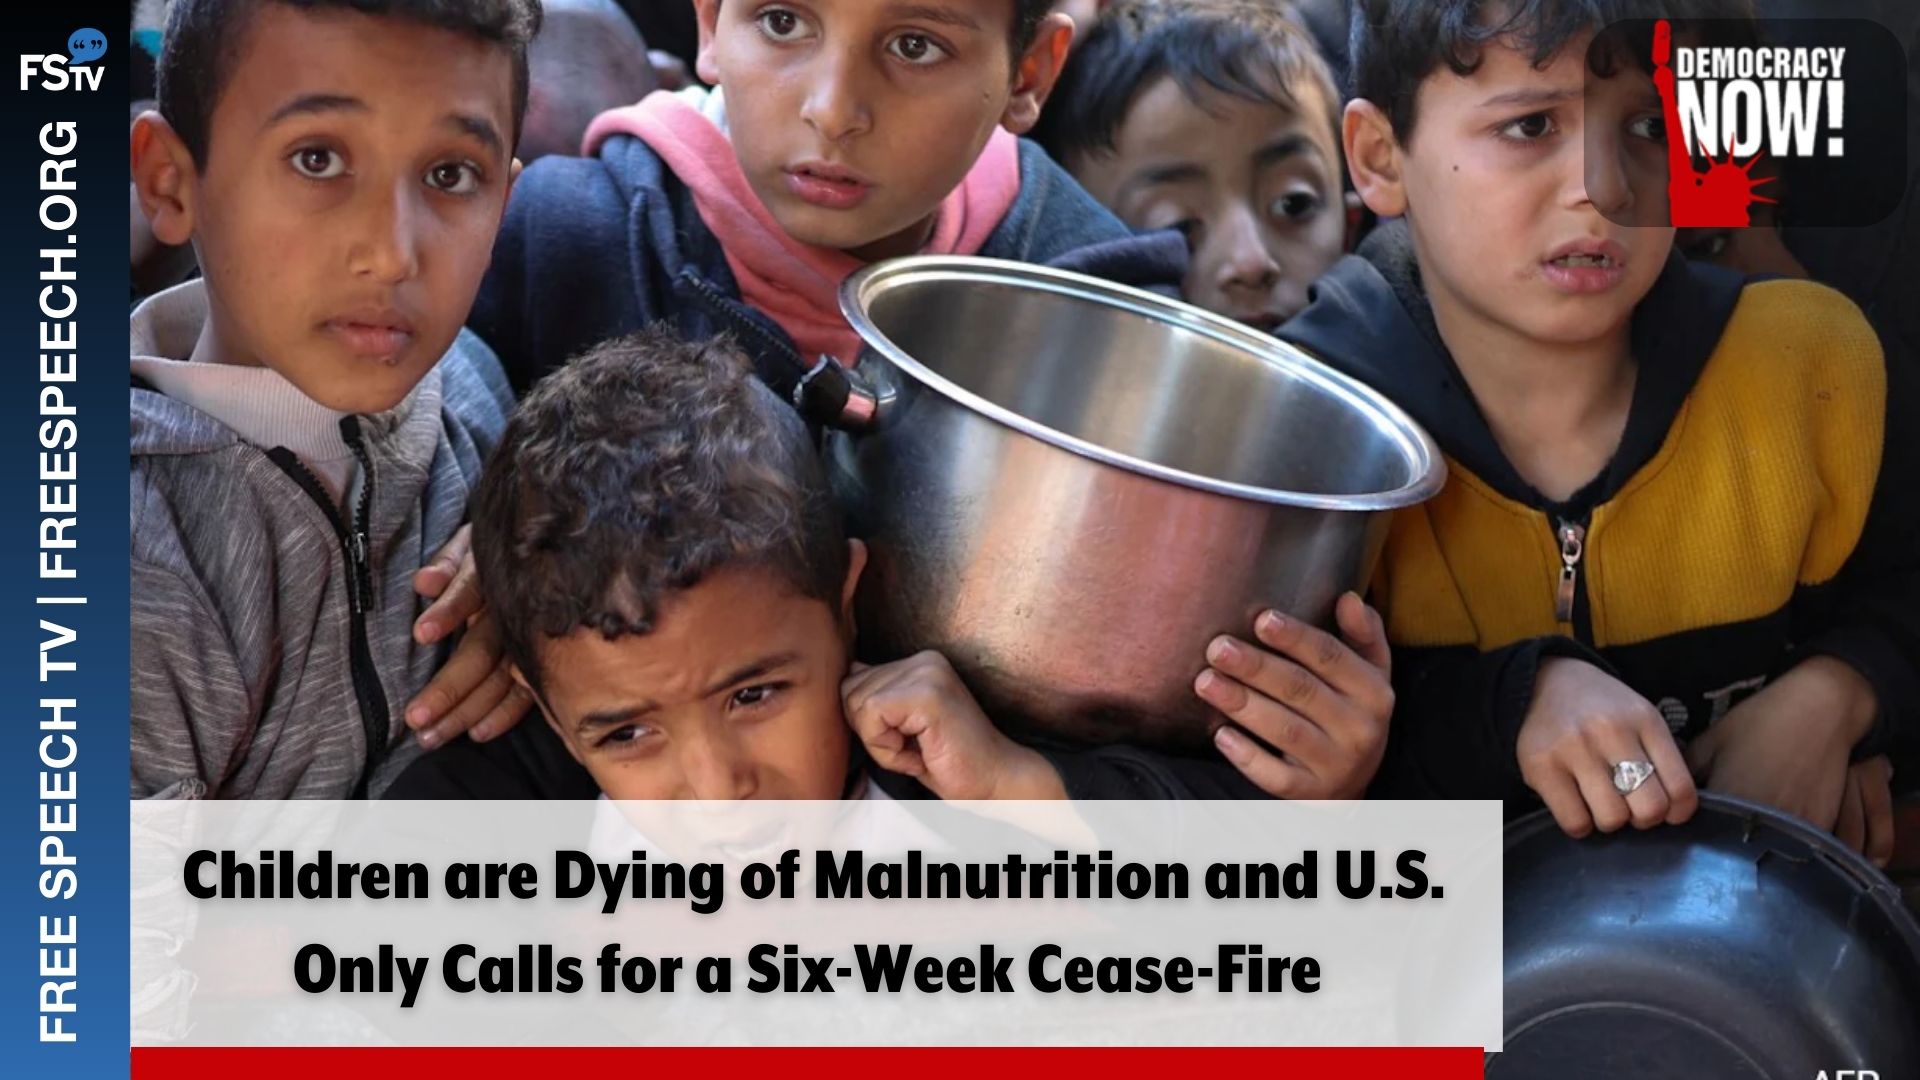 Democracy Now! | Children in are Dying of Malnutrition and U.S. Only Calls for a Six-Week Cease-Fire